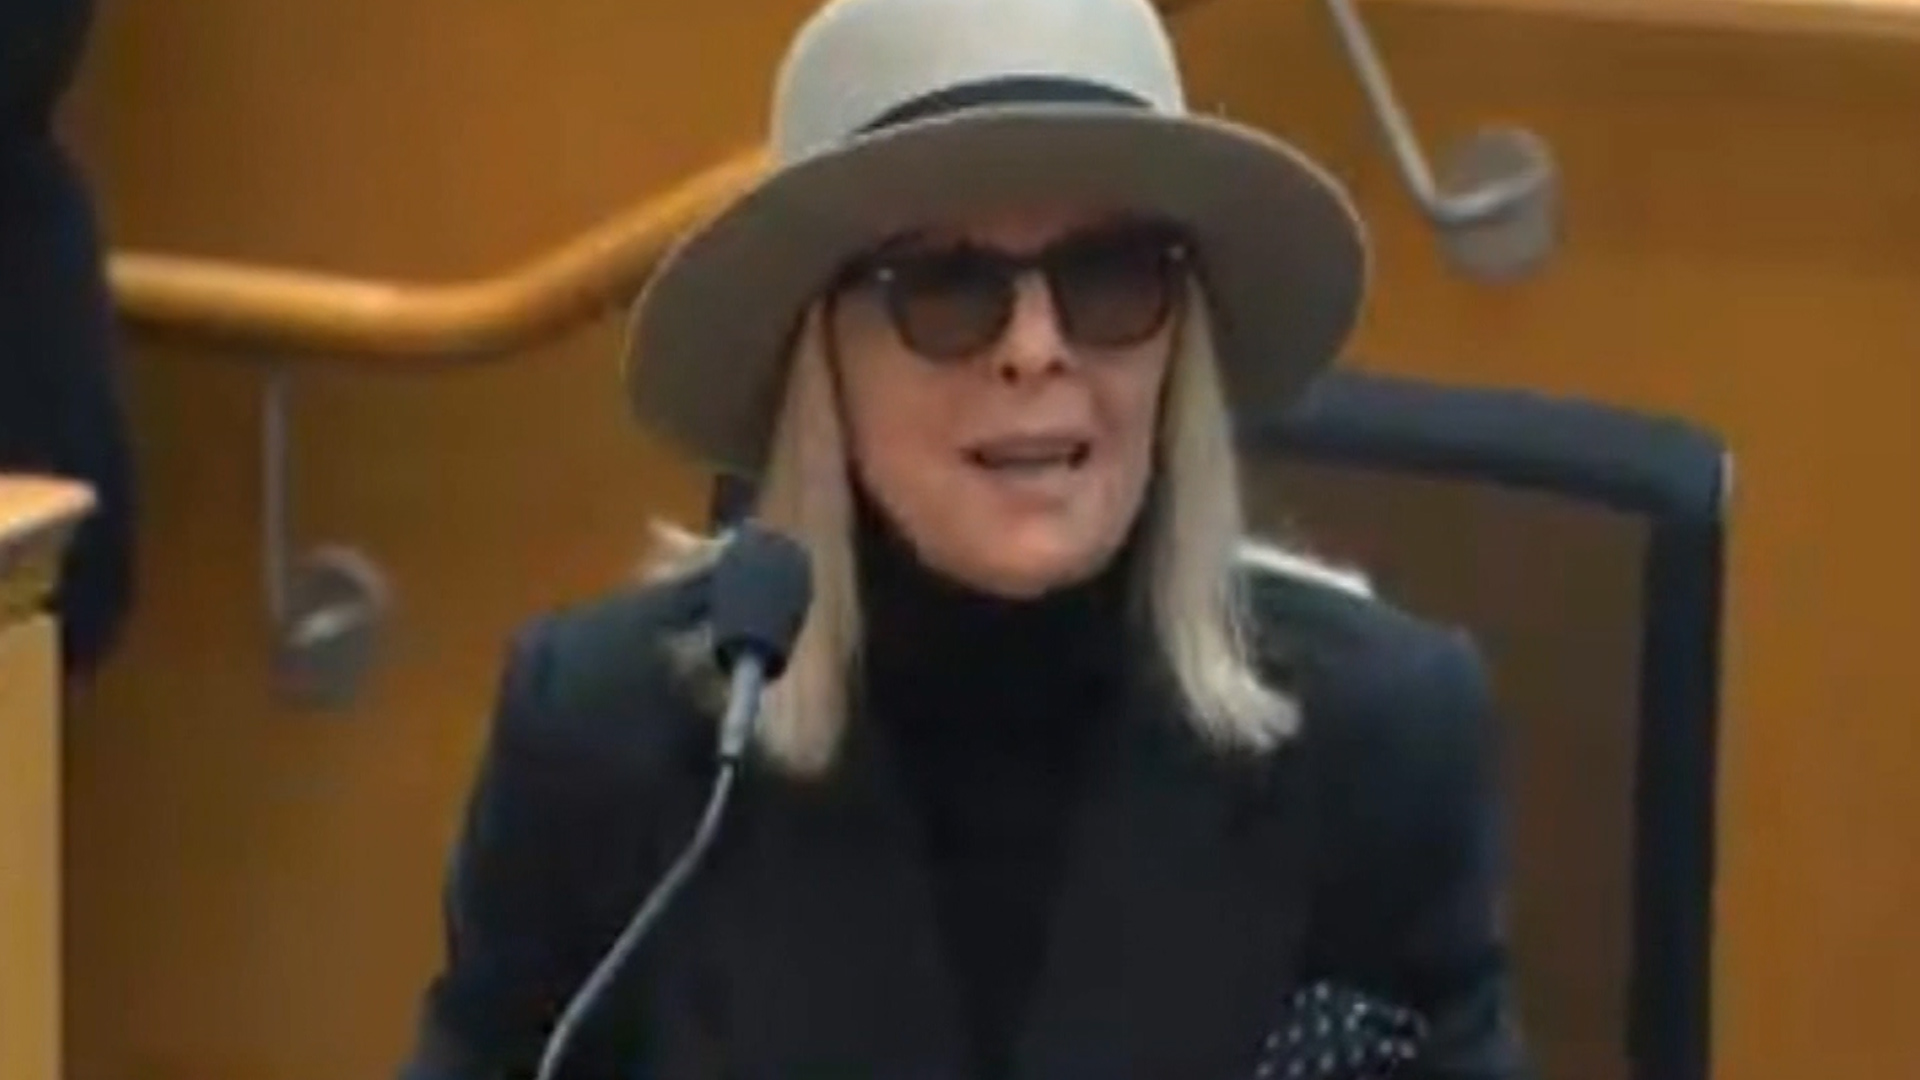 Diane Keaton also voiced her support for the Los Angeles County Museum of Art at Tuesday's hearing of the Los Angeles County Board of Supervisors. (Los Angeles County Board of Supervisors)